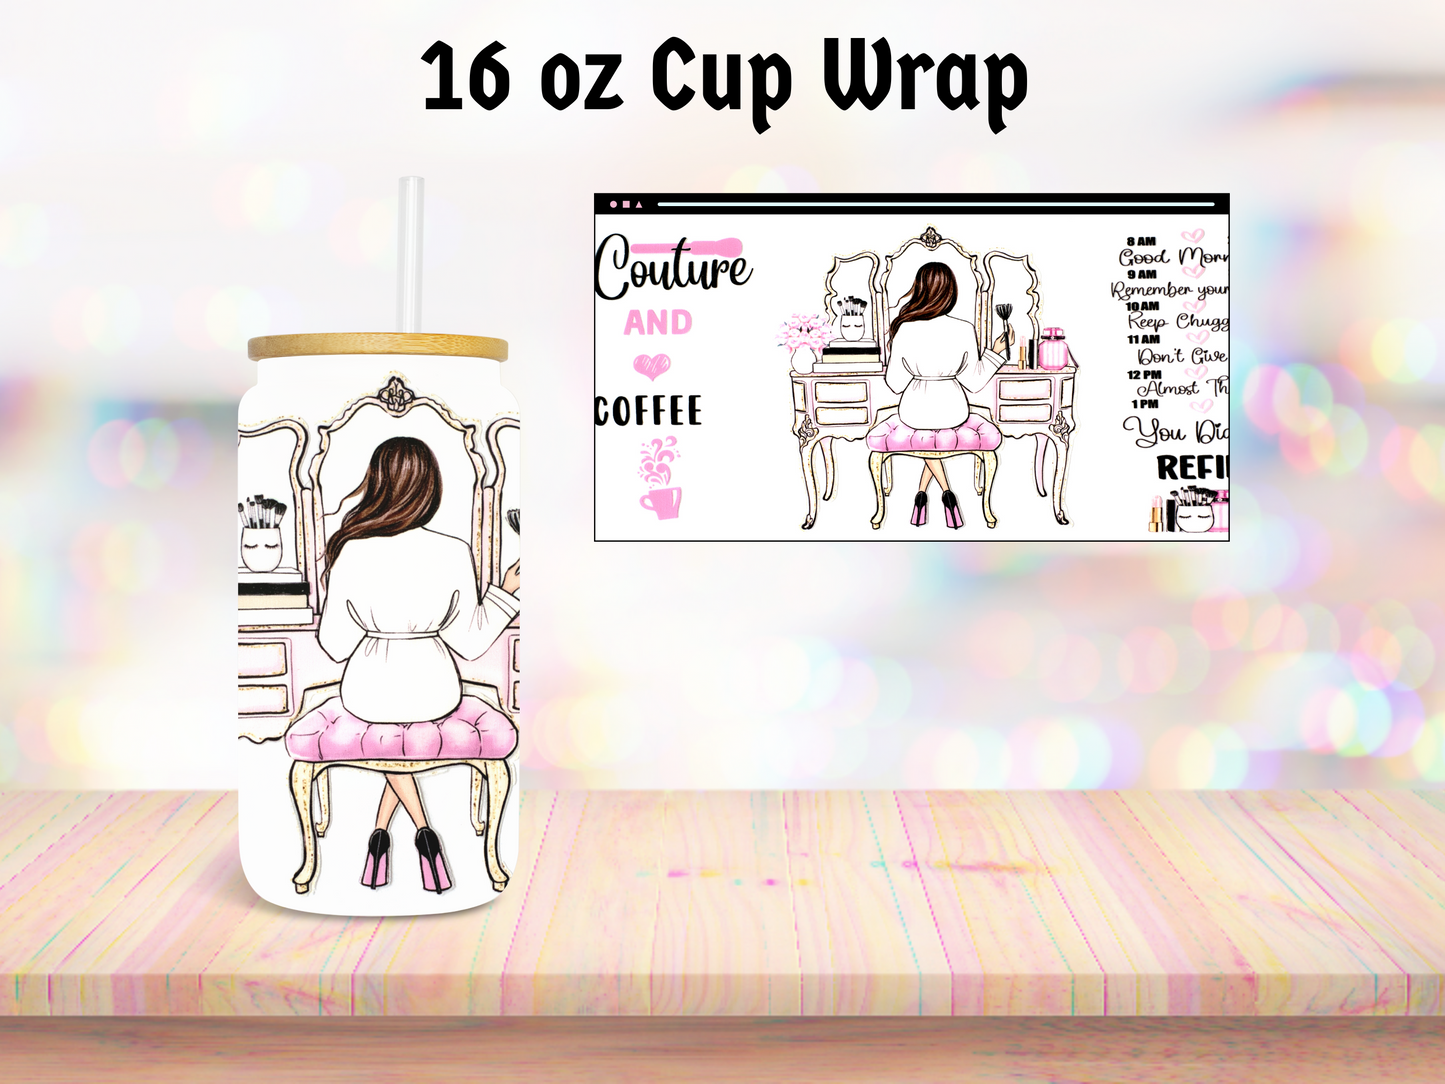 Couture and Coffee 16oz Cup Wrap